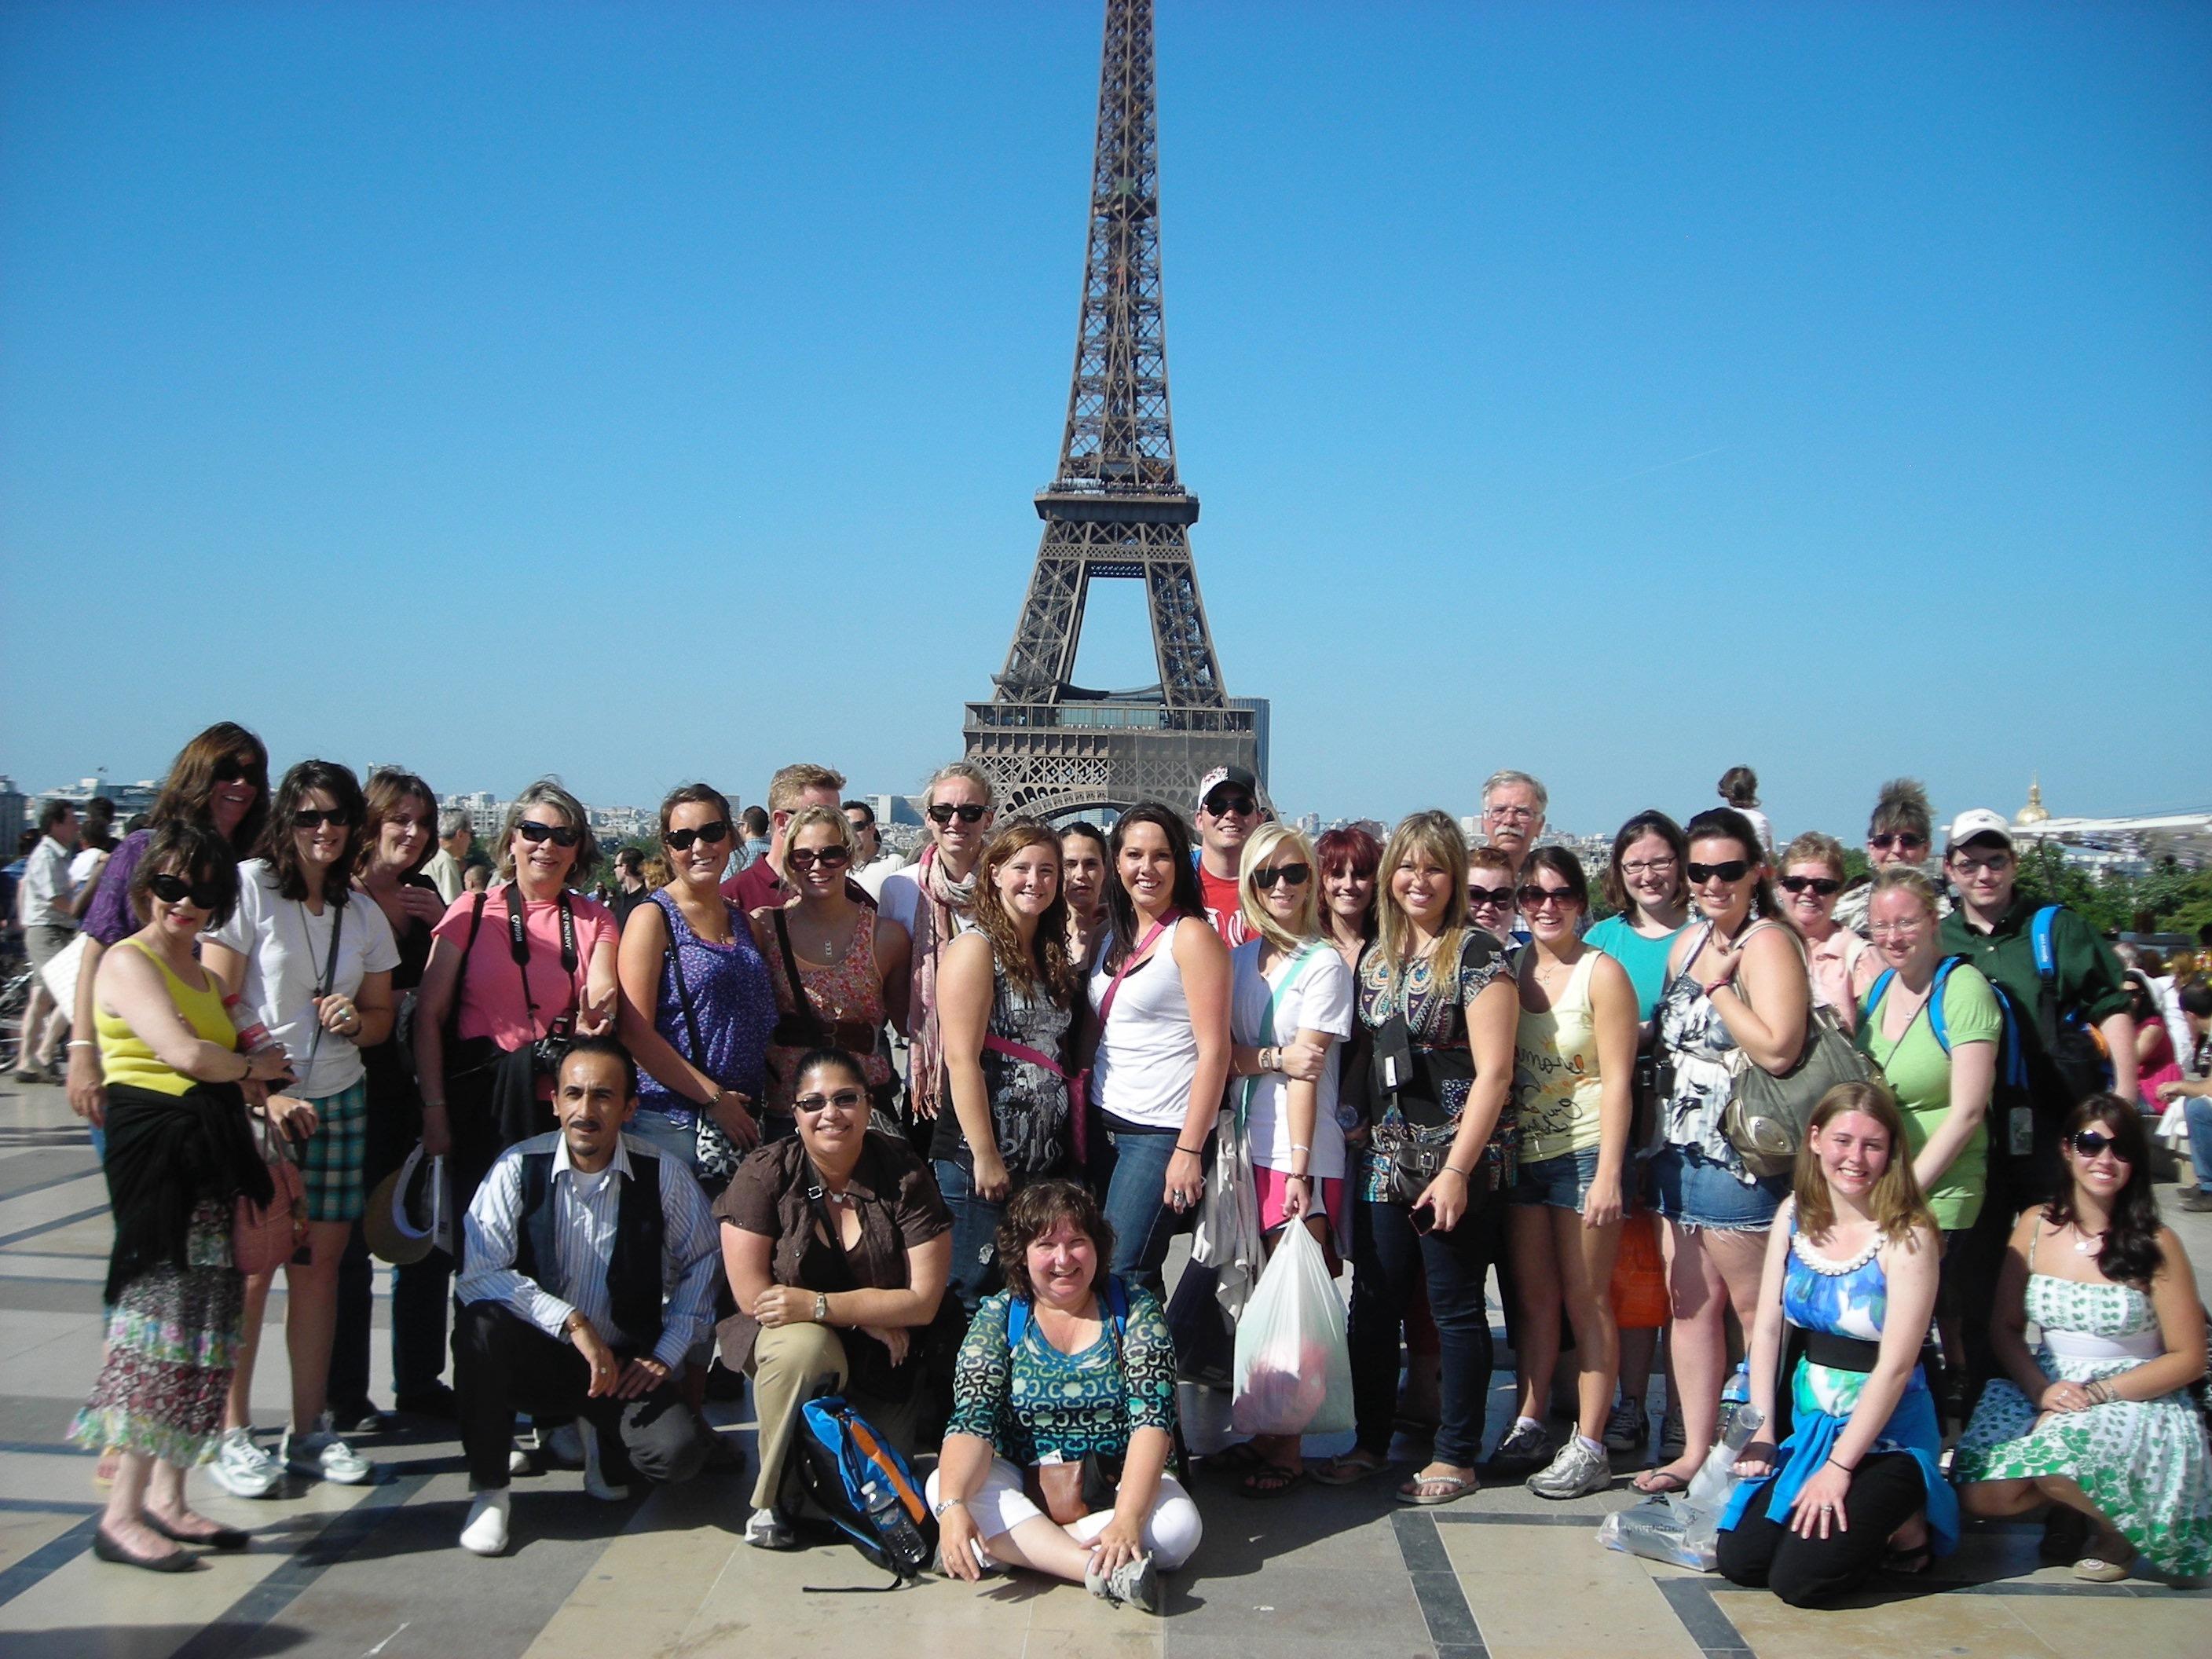 Holy Family University students post in front of the Eiffel Tower in Paris, France